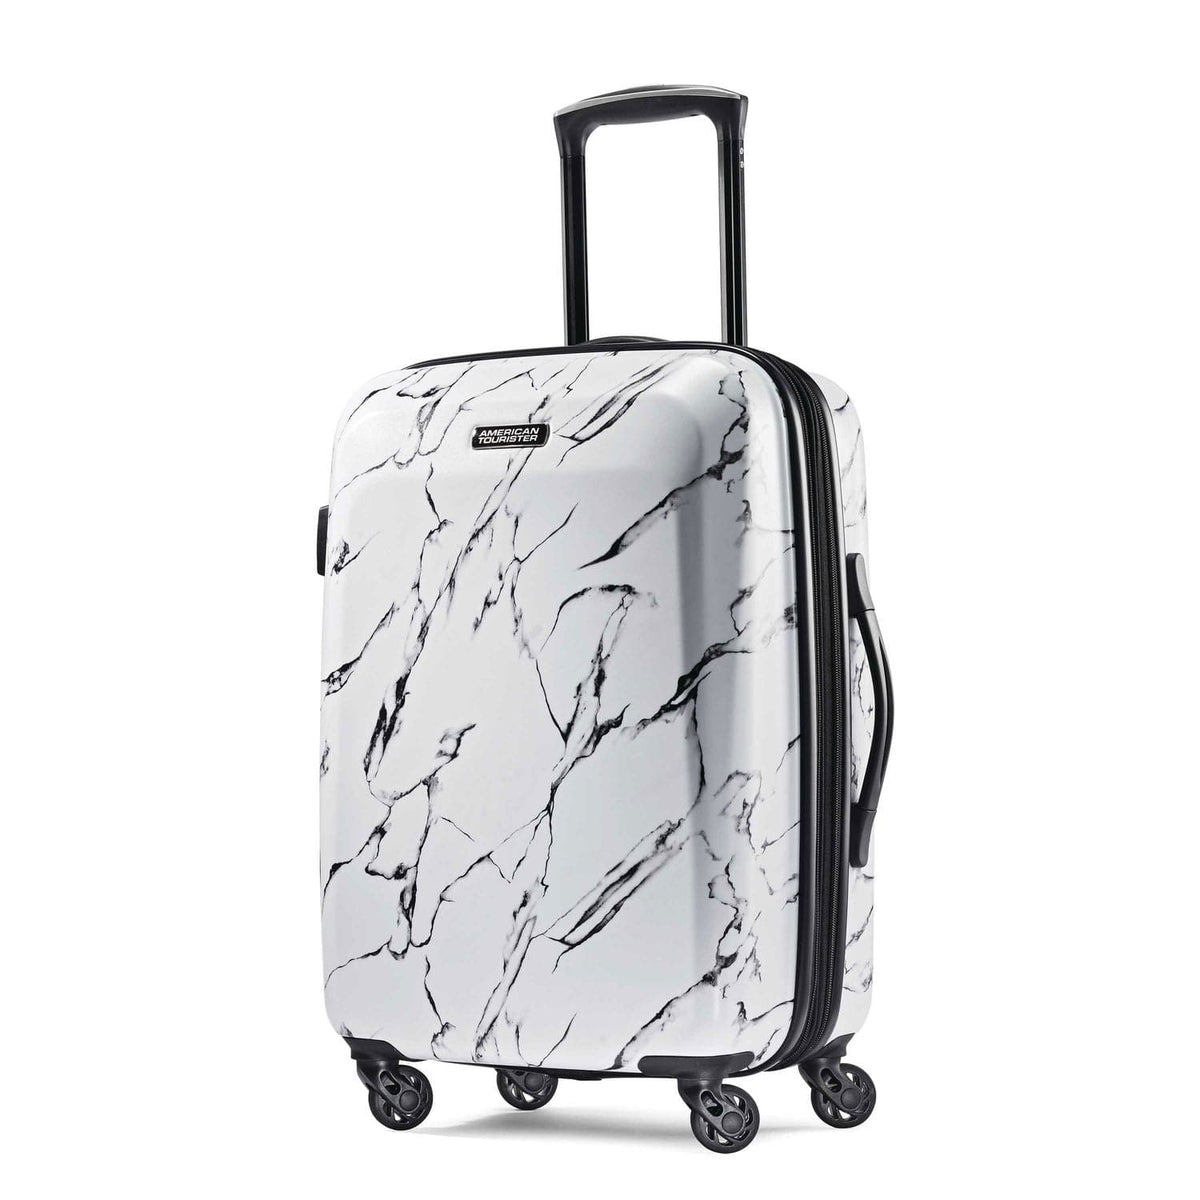 American Tourister Moonlight 21 Spinner Luggage Marble